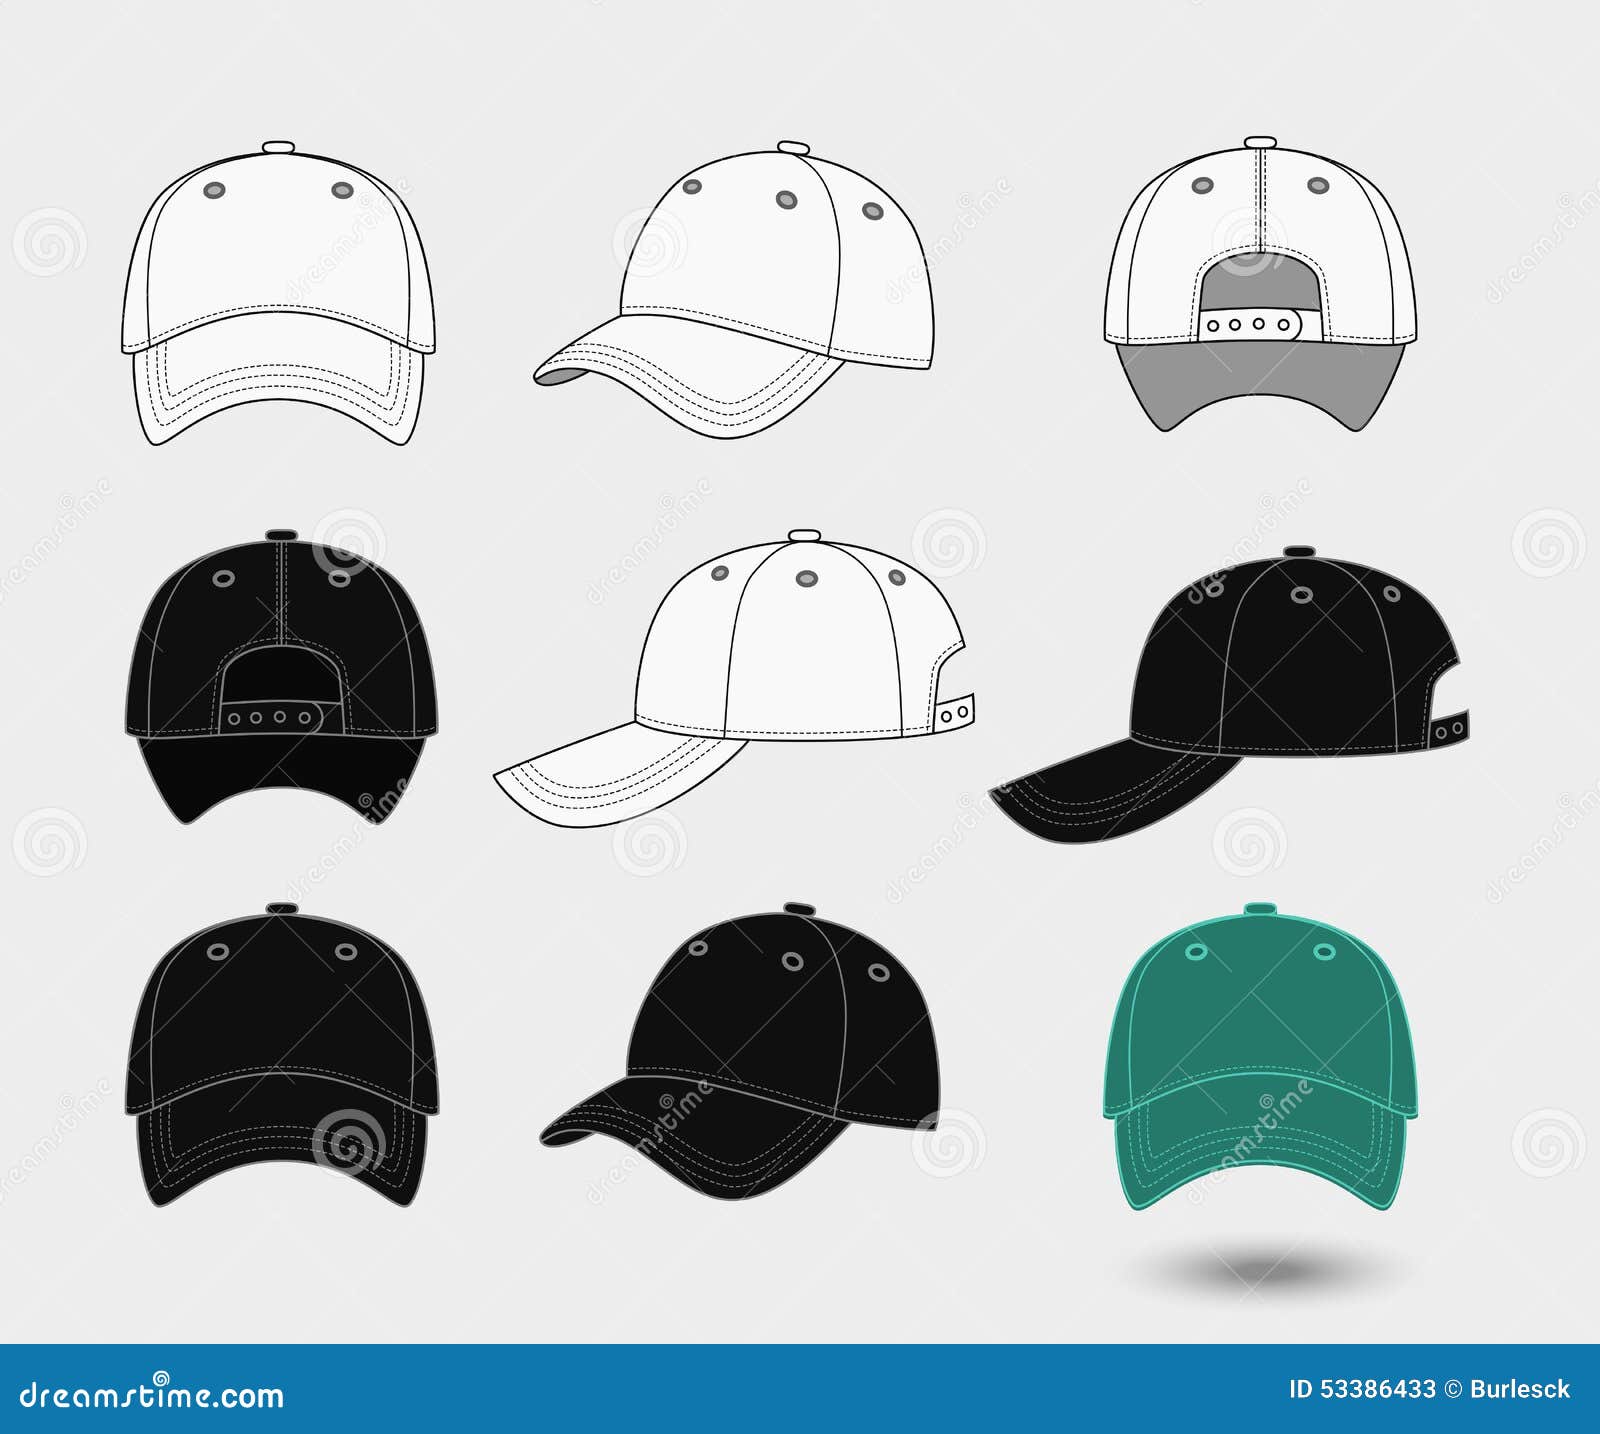 baseball cap. back, front and side view